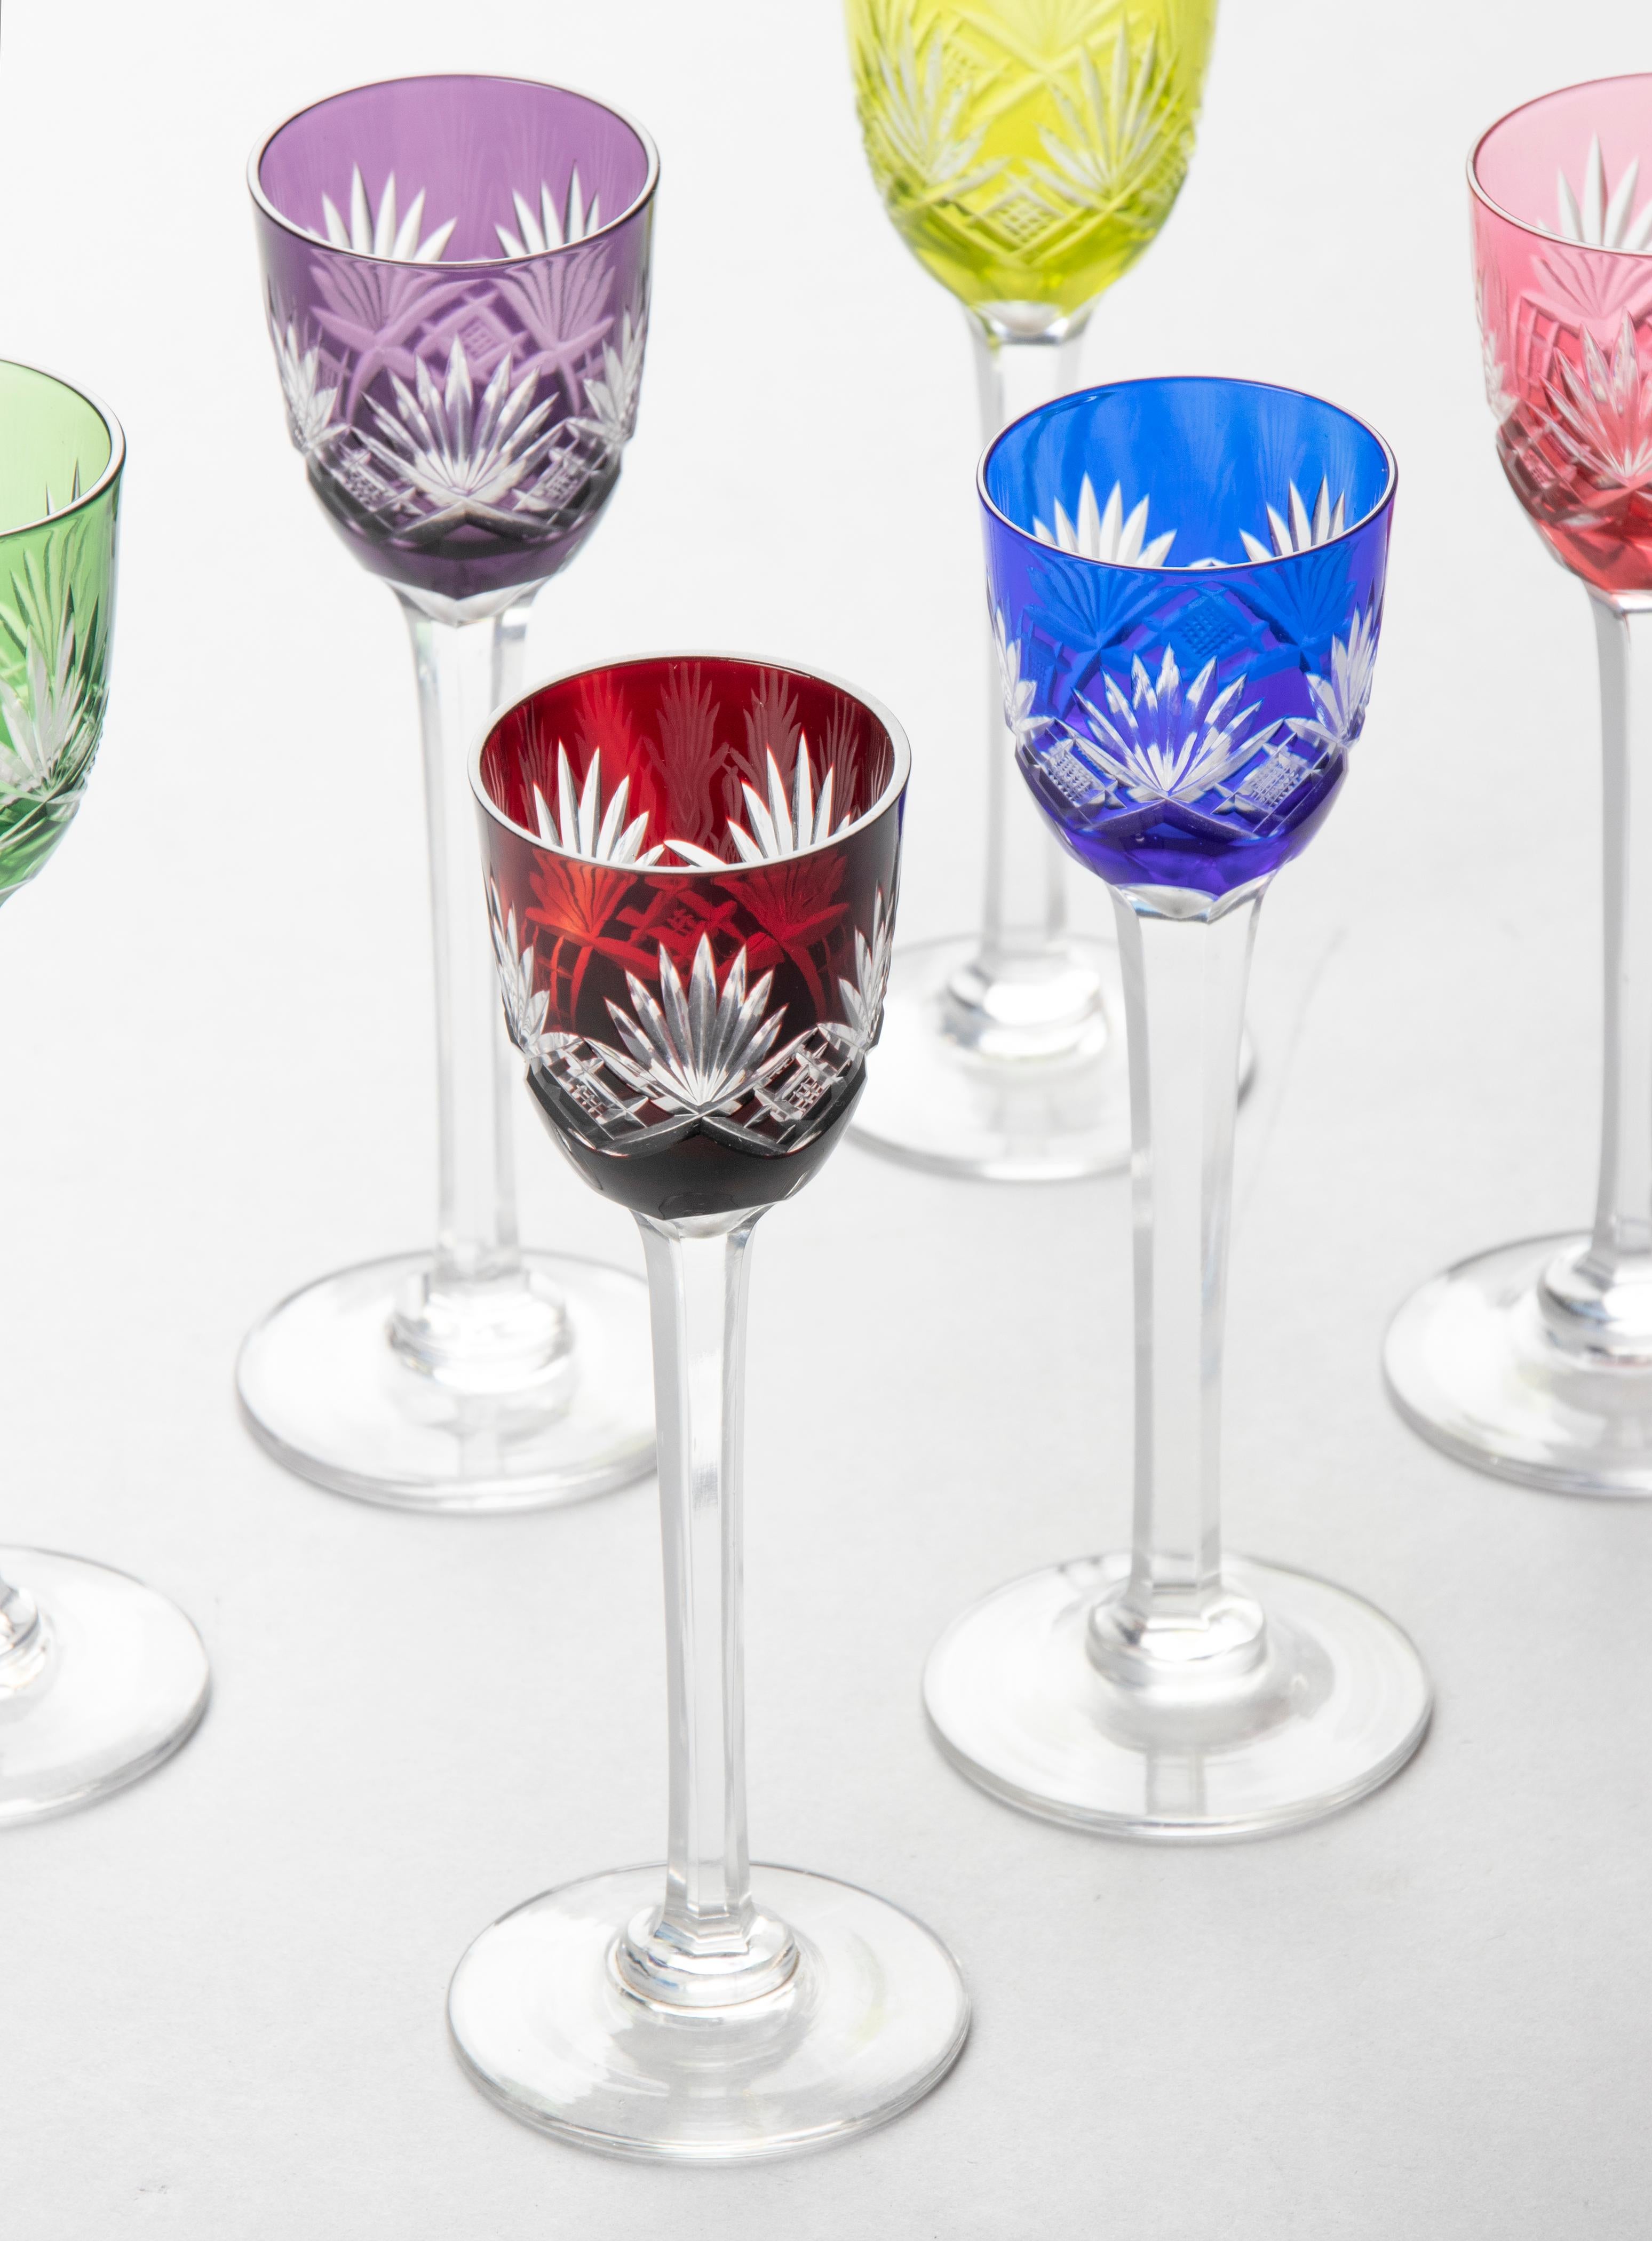 Mid-20th Century Set of 6 Crystal Colored Liquor Glasses Made by Val Saint Lambert